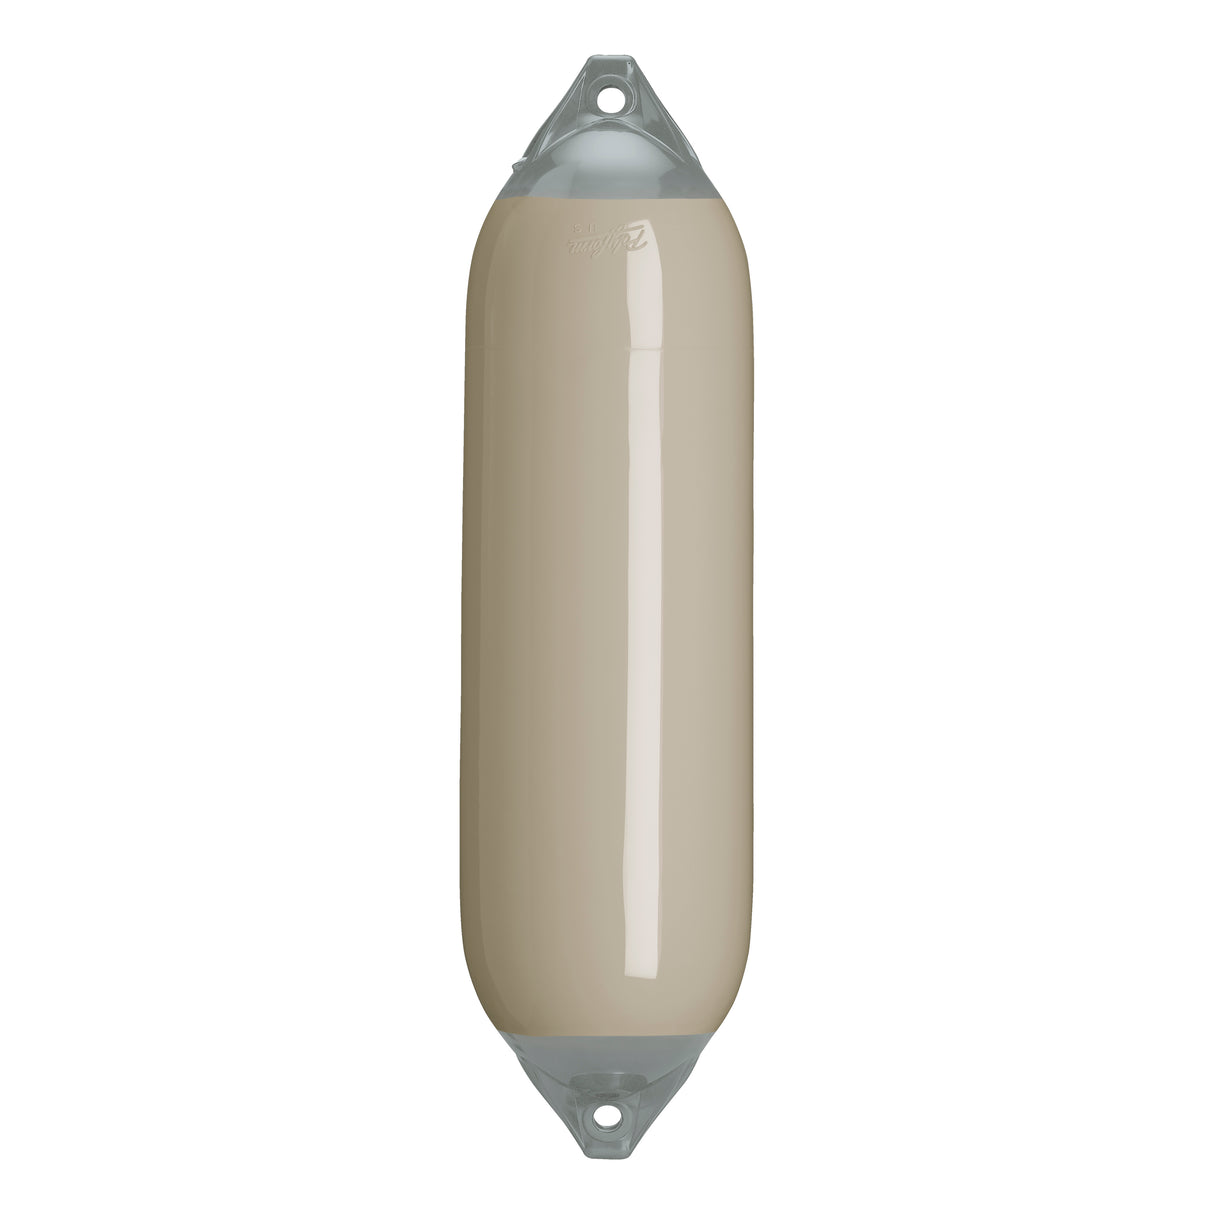 Sand boat fender with Grey-Top, Polyform F-6